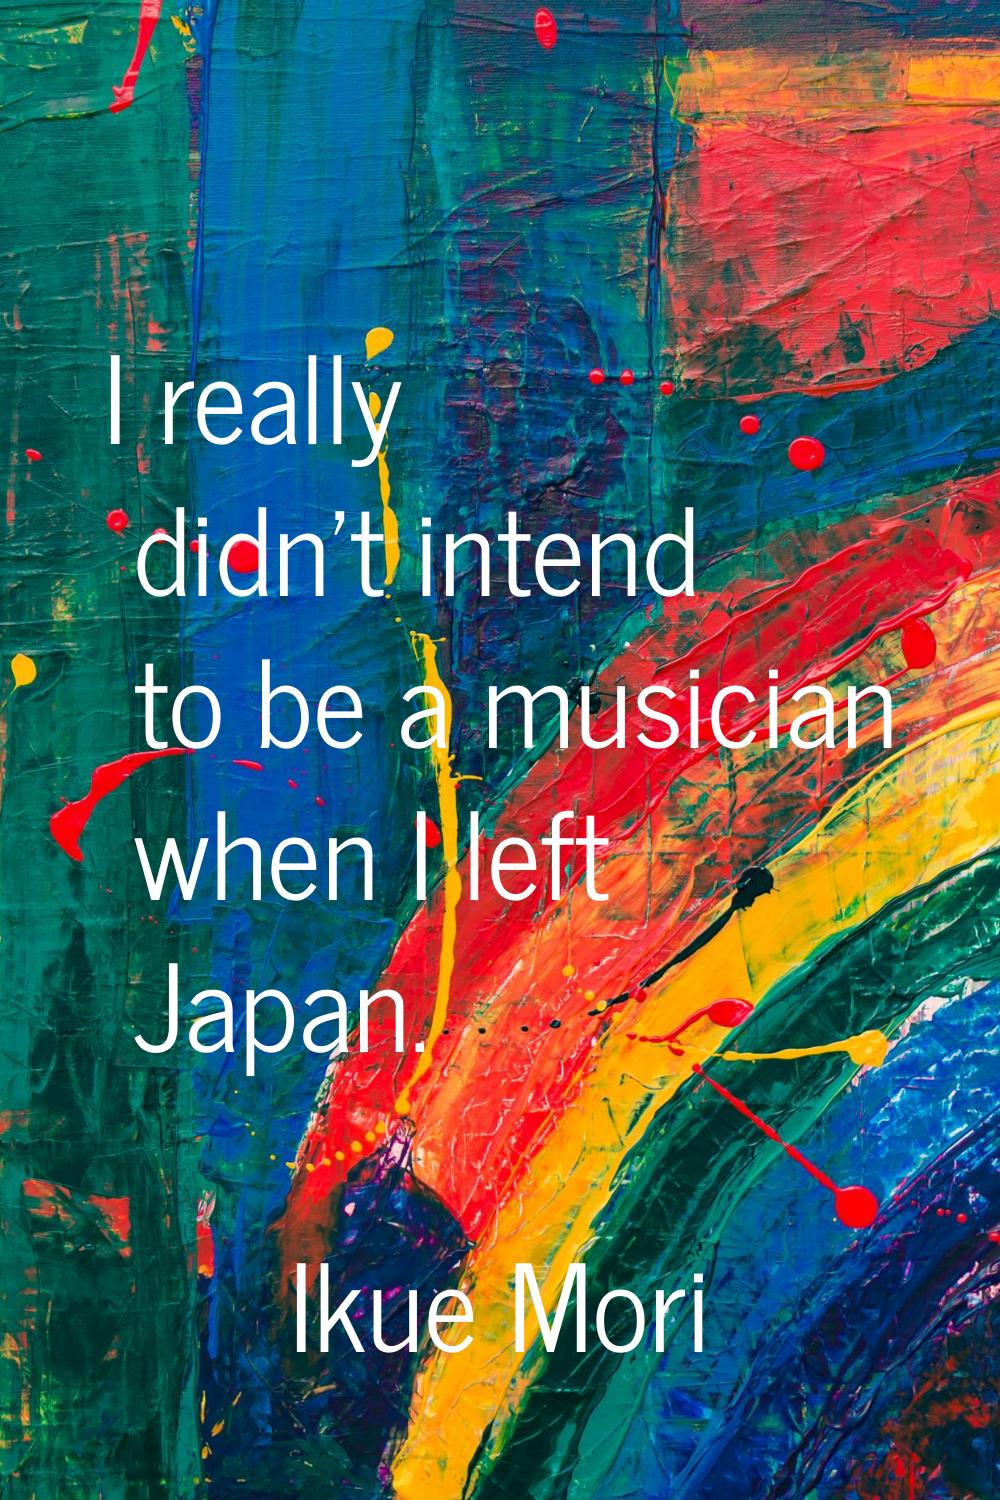 I really didn't intend to be a musician when I left Japan.